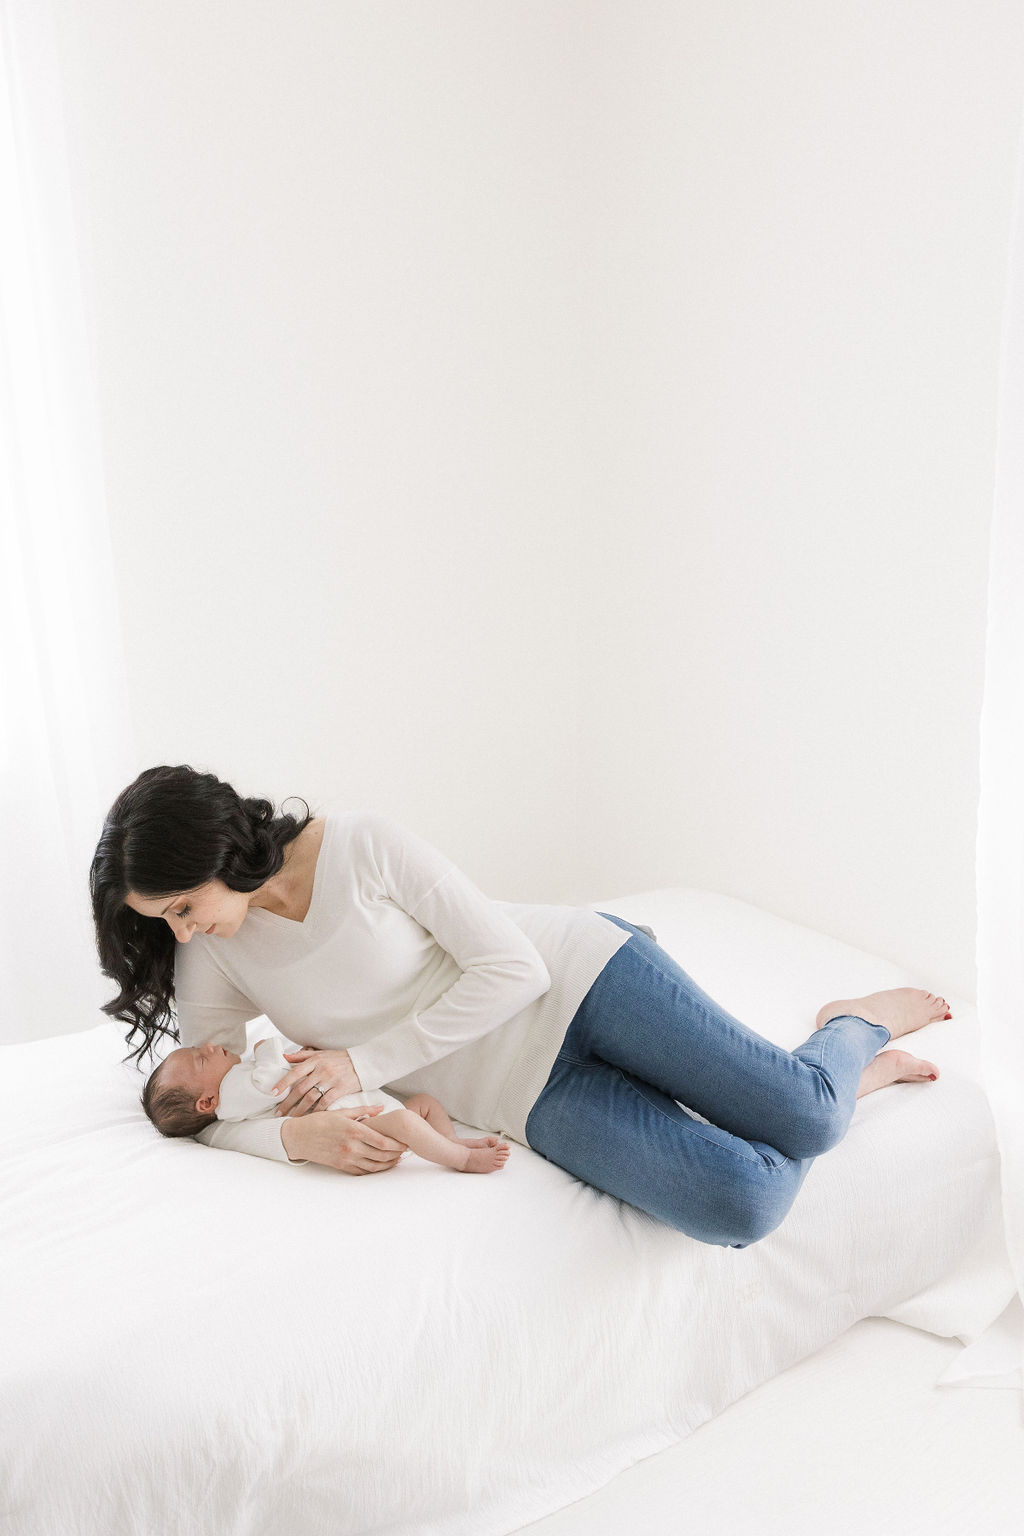 A mother in jeans lays across a bed with her newborn baby sleeping on her arm